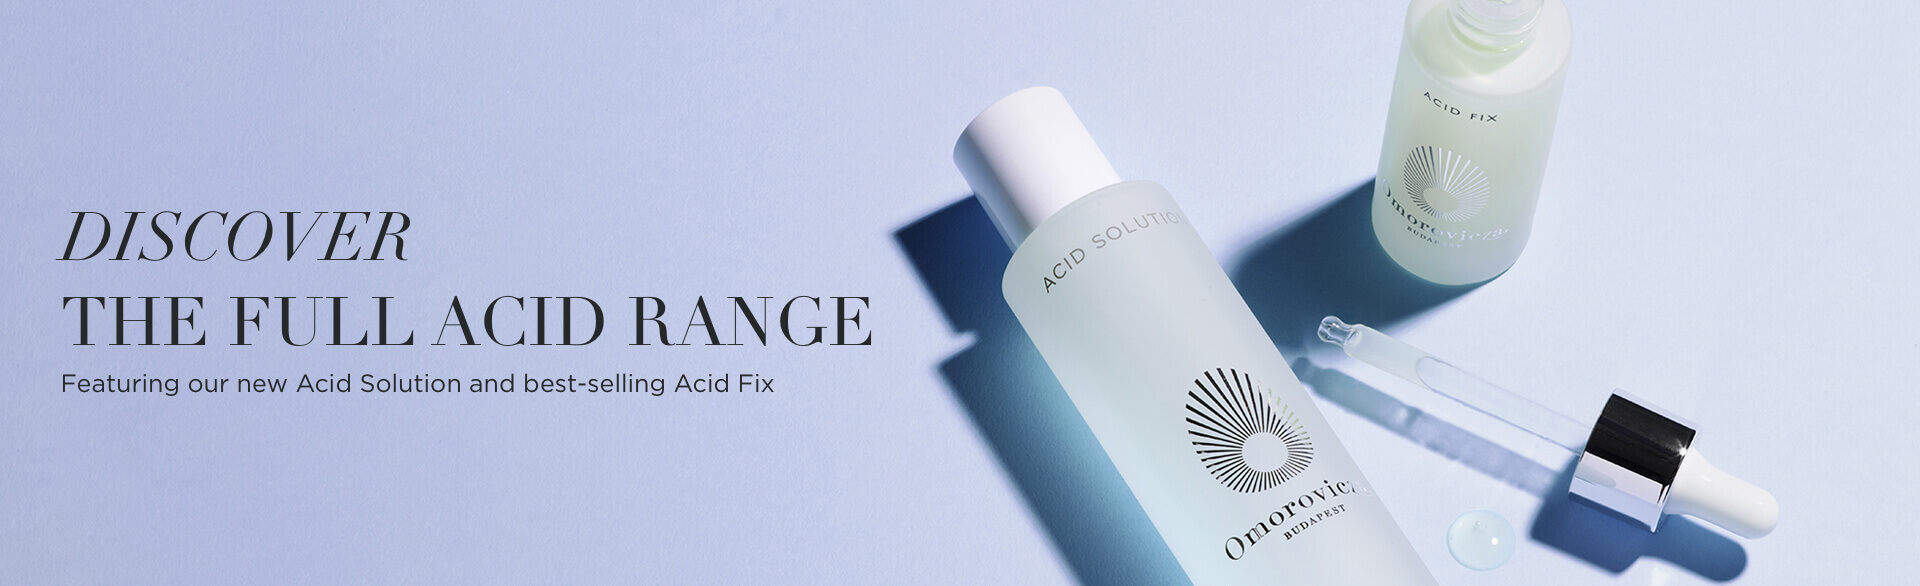 Discover the full acid range. Featuring our new Acid Solution and best-selling Acid Fix